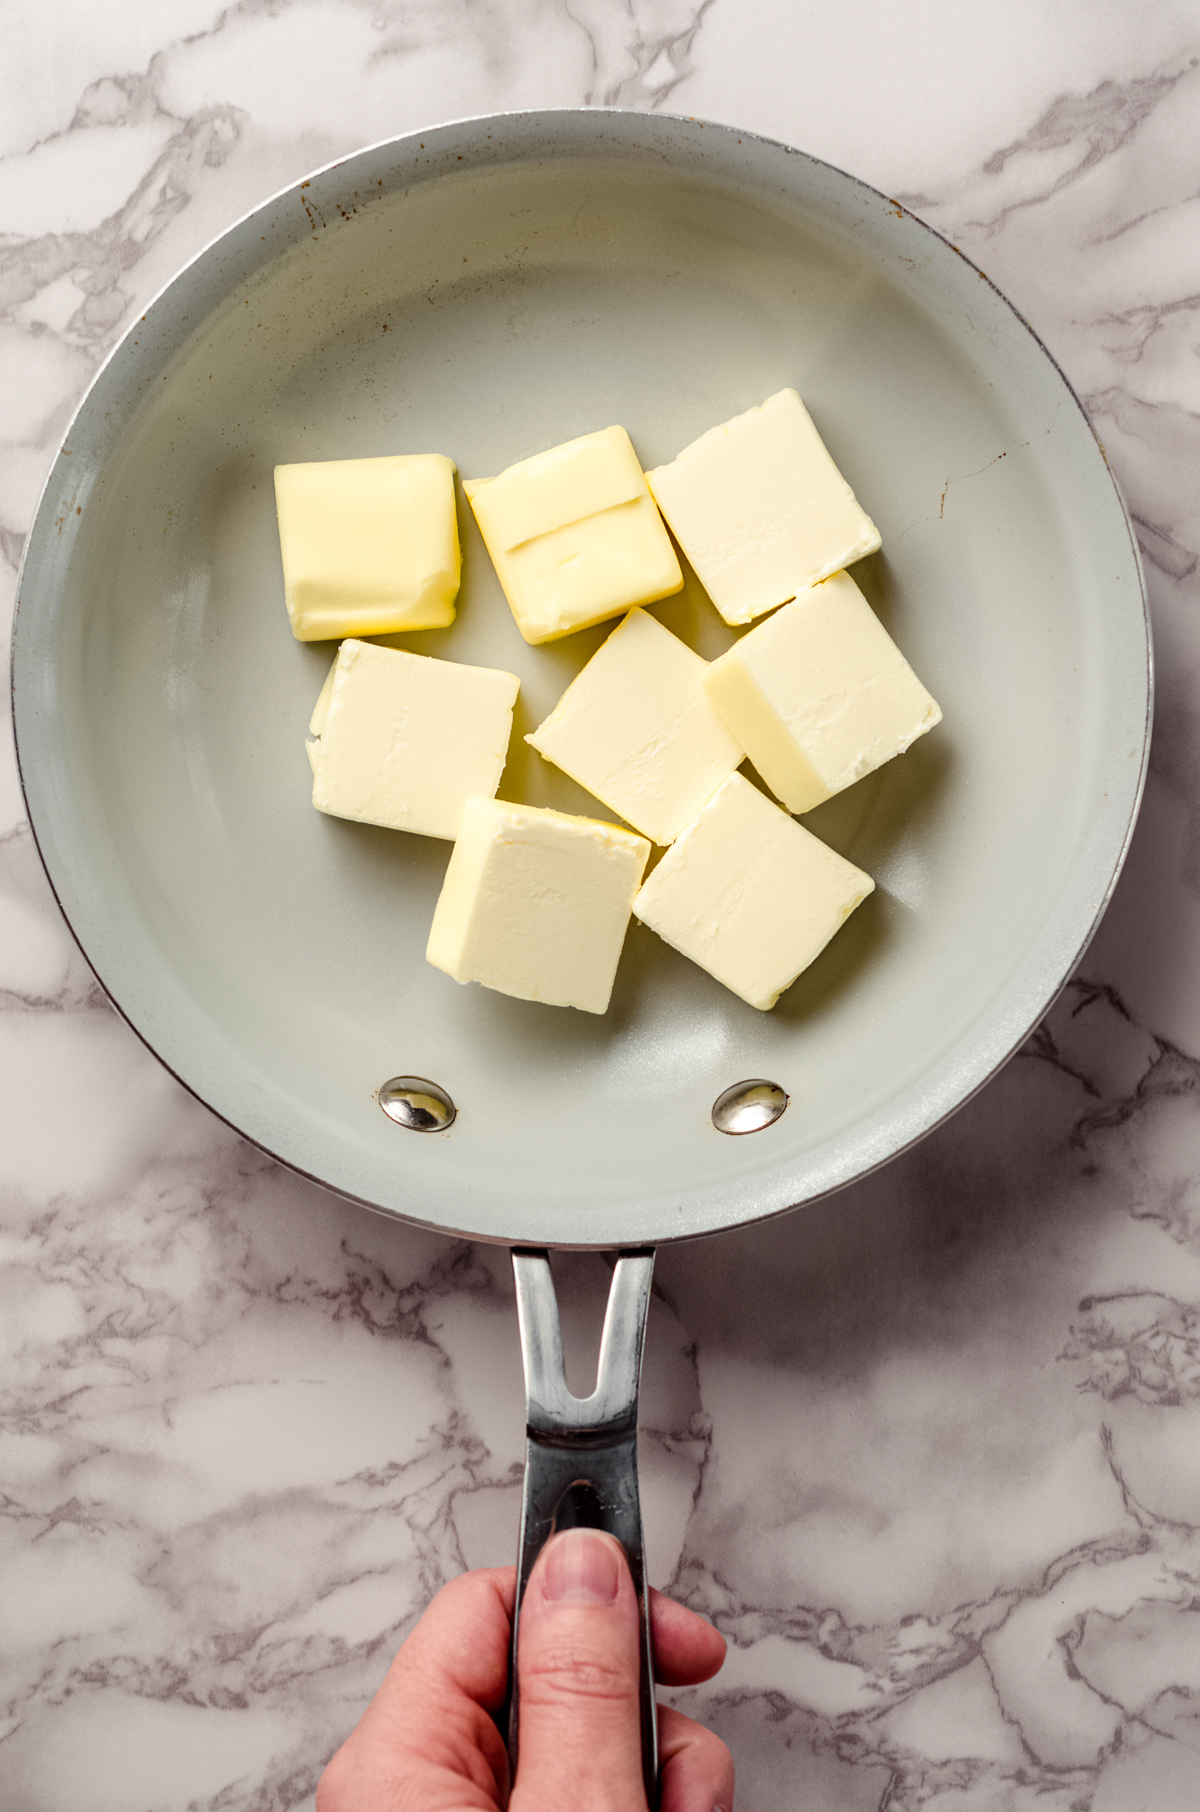 An aerial photo of a skillet of butter ready to make brown butter. There is a hand holding the handle of the skillet.